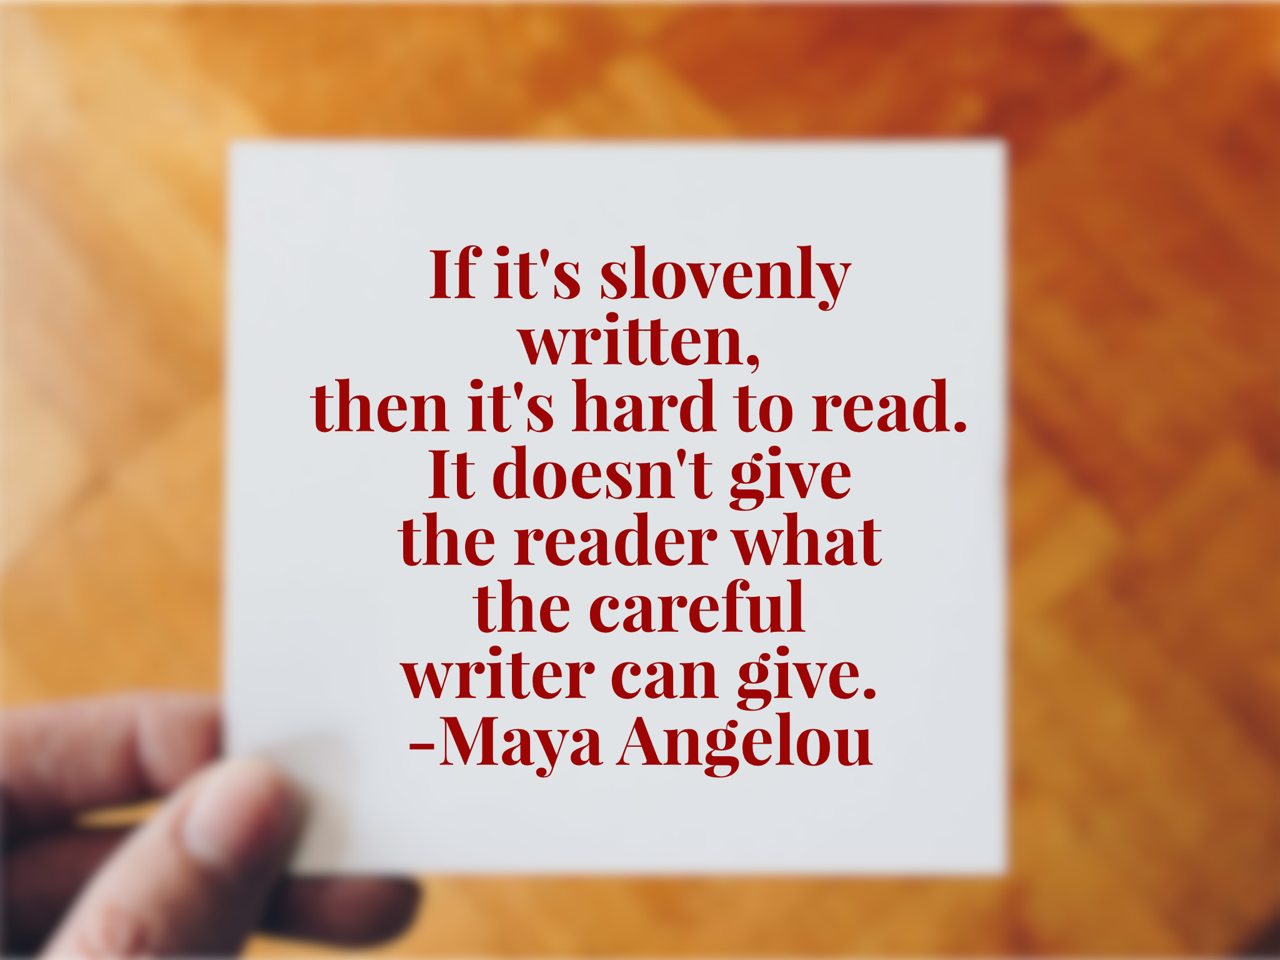 "If it's slovenly written, then it's hard to read. It doesn't give the reader what the careful writer can give." a quote from Maya Angelou